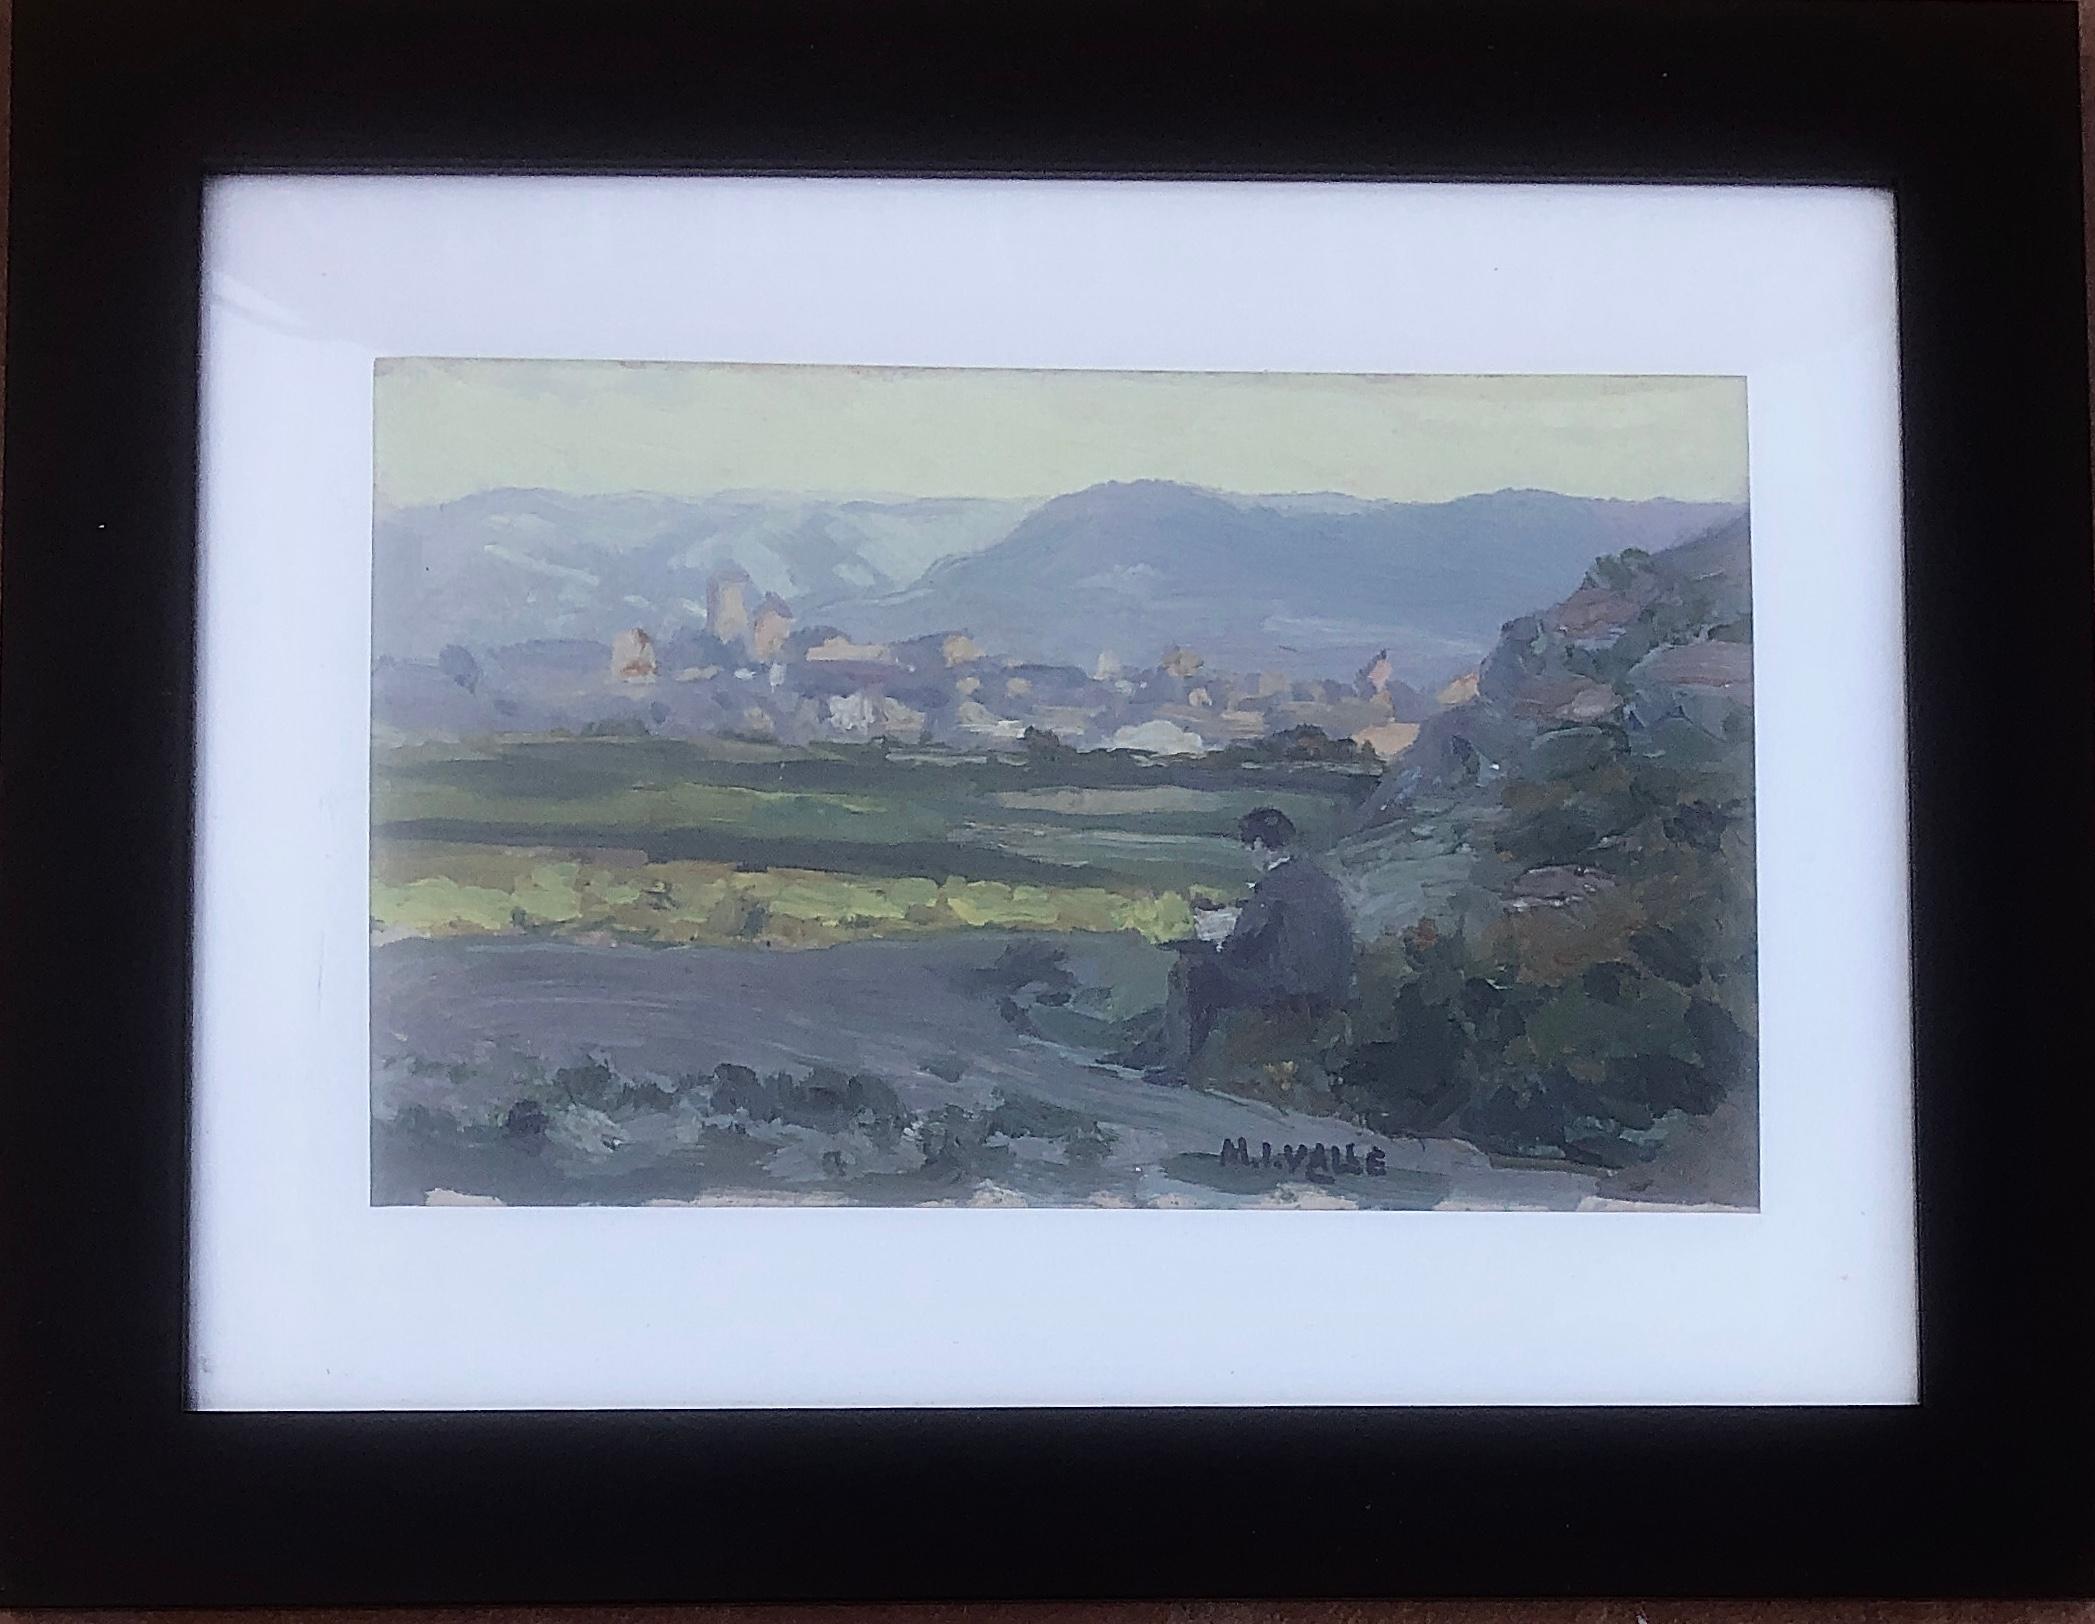 Manuel Isidor Valle Micolau (1874-1959) - Spanish landscape - Oil on board
Oil mesures 11.5x19 cm.
Frame measures 22x28 cm.

Photographer and artist from Lleida trained at the 